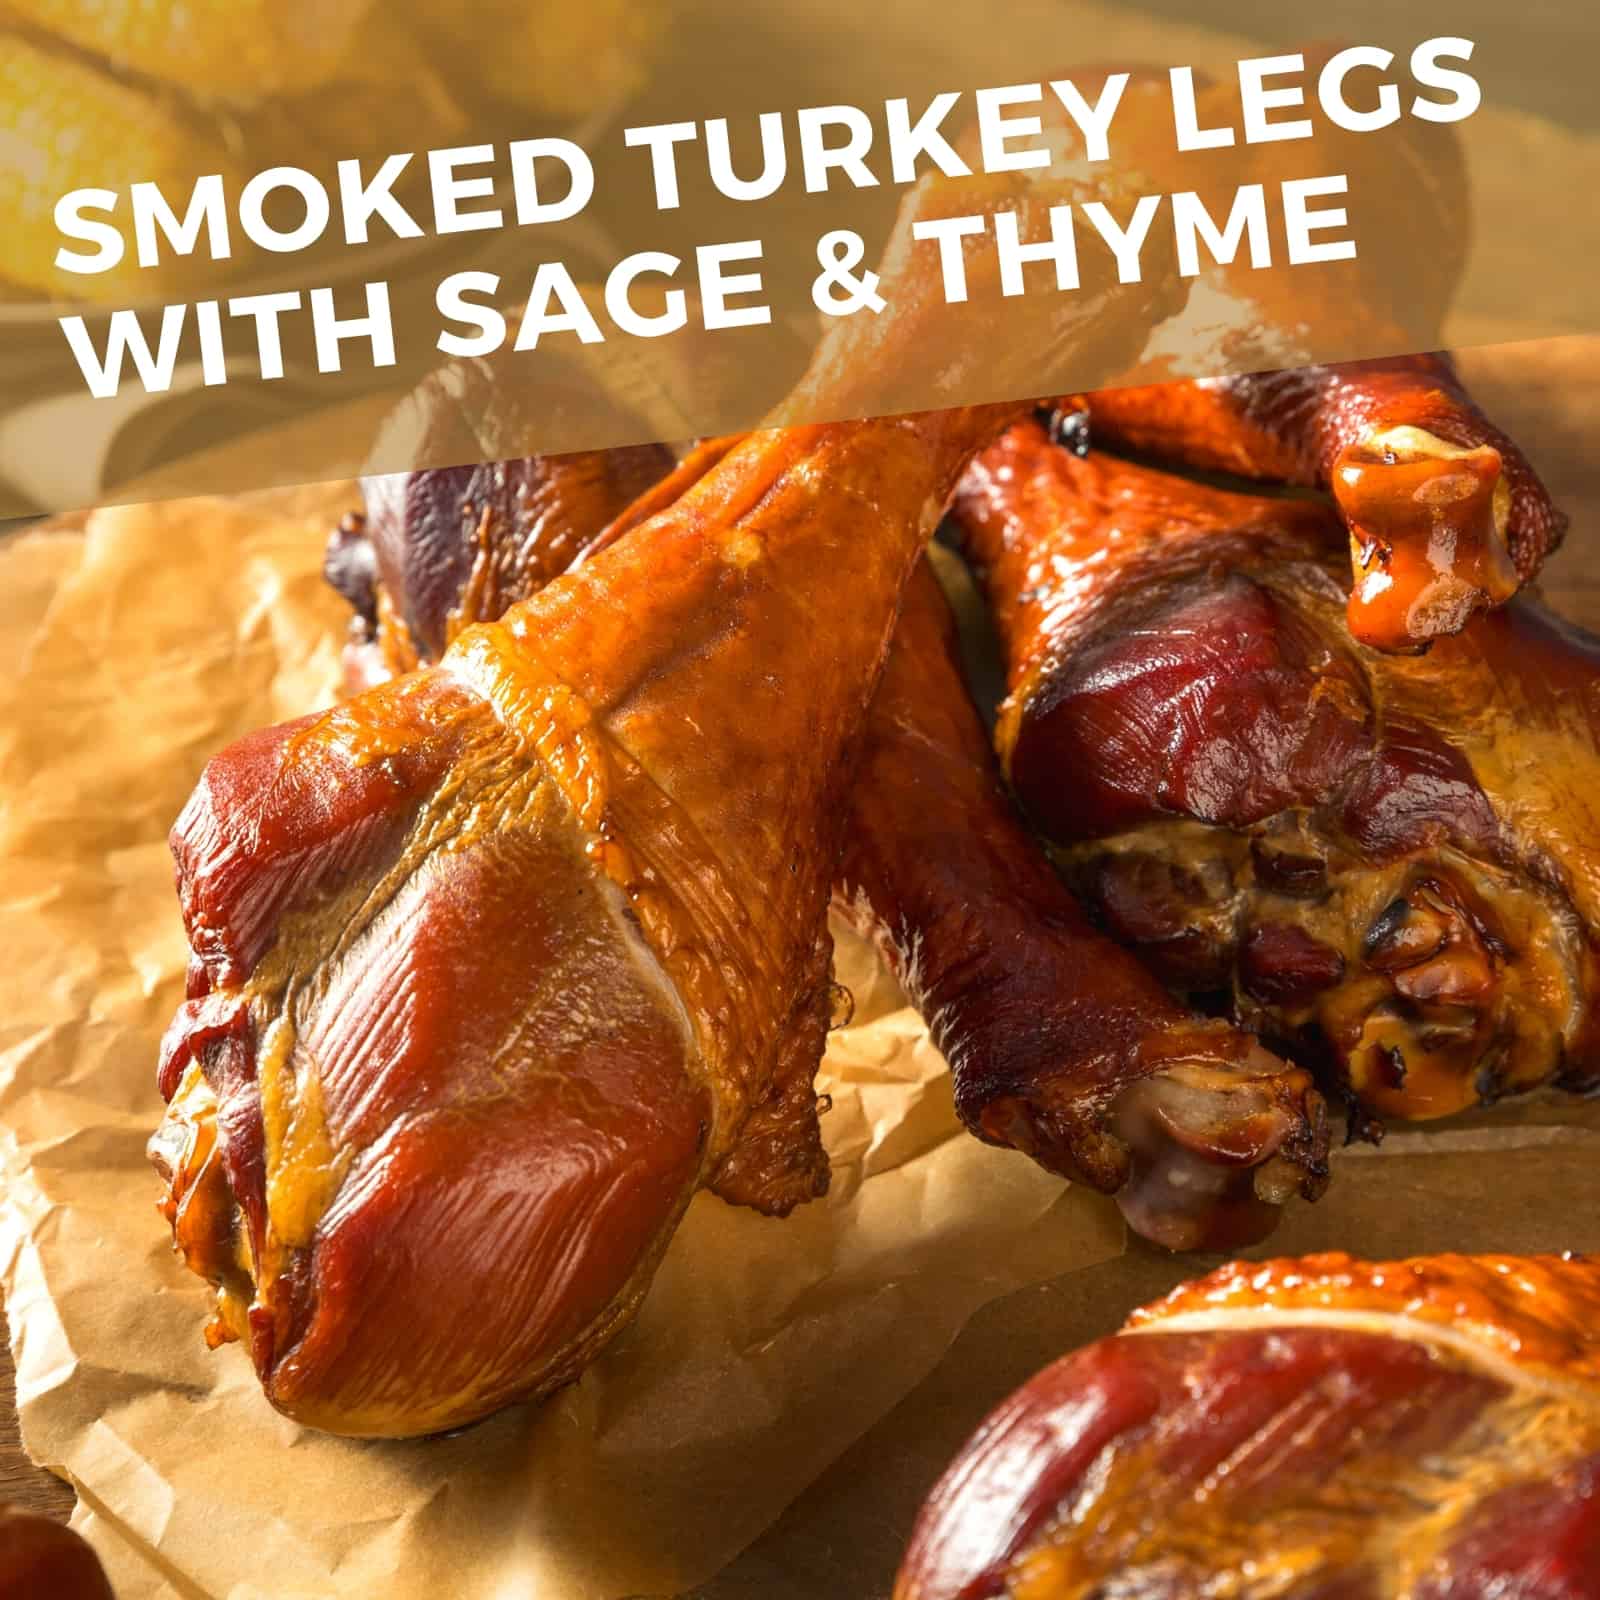 Smoked turkey legs with sage & thyme